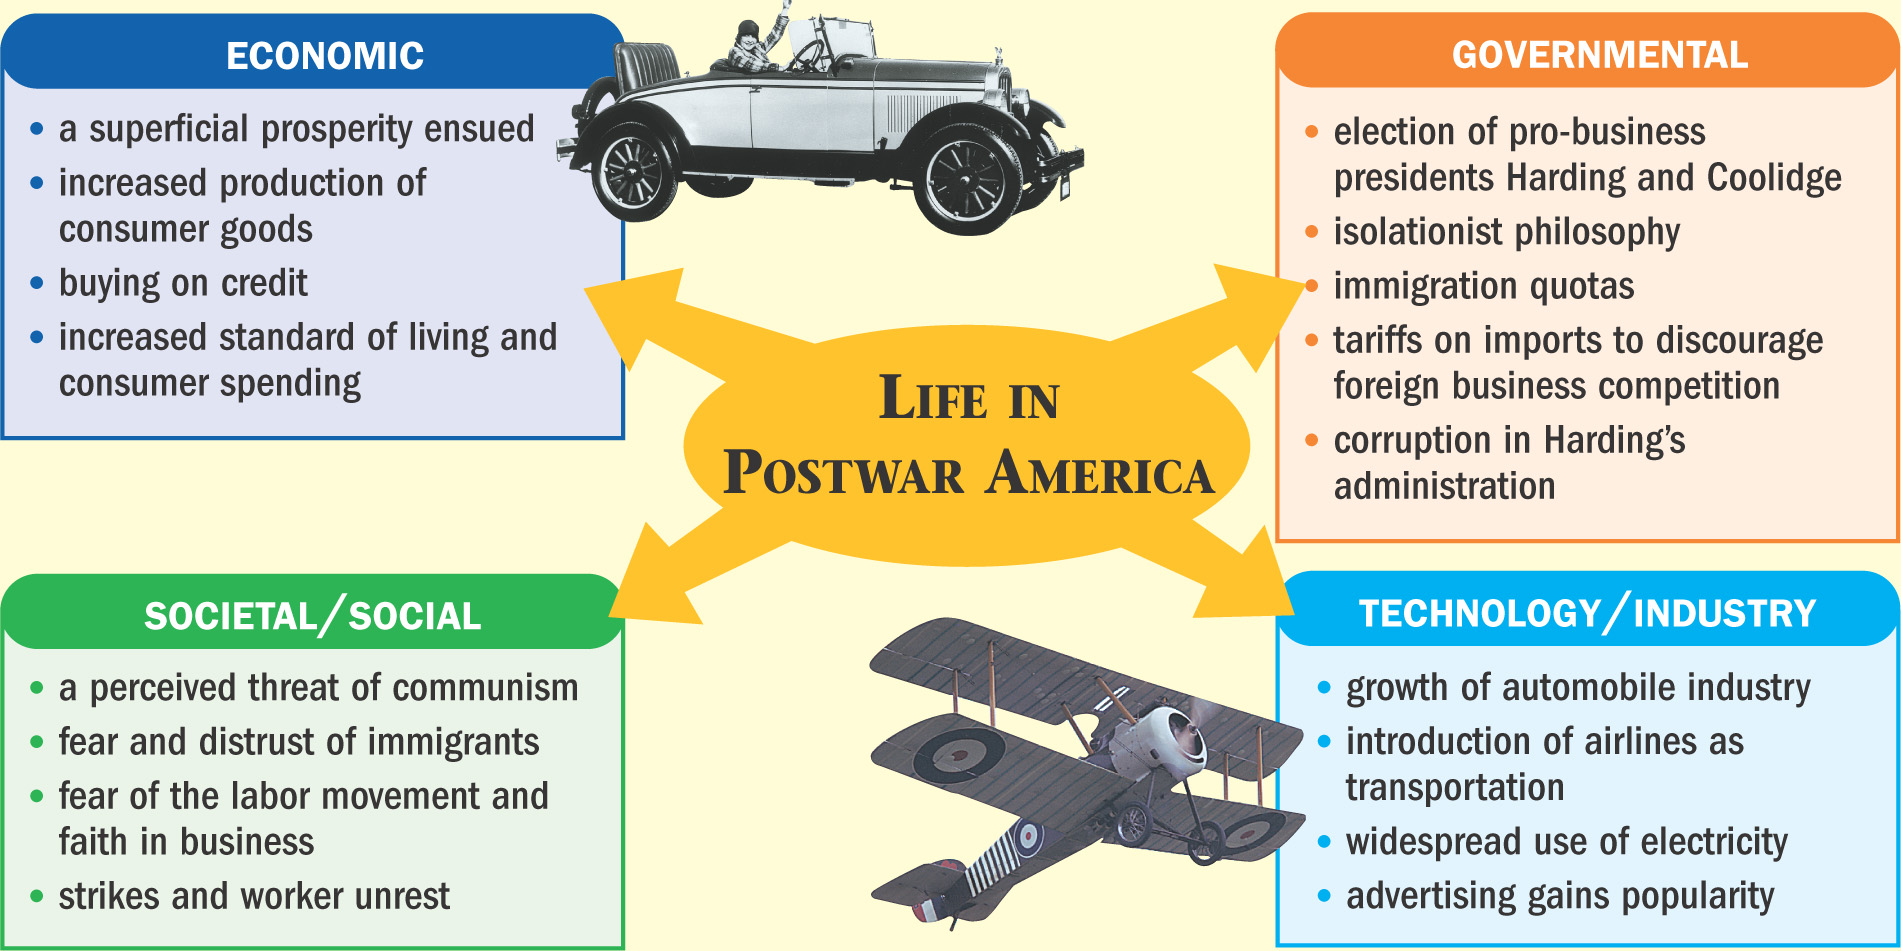 Diagram: shows four aspects of Life in Postwar America - Economic, Societal/Social, Governmental, and Technology/Industry